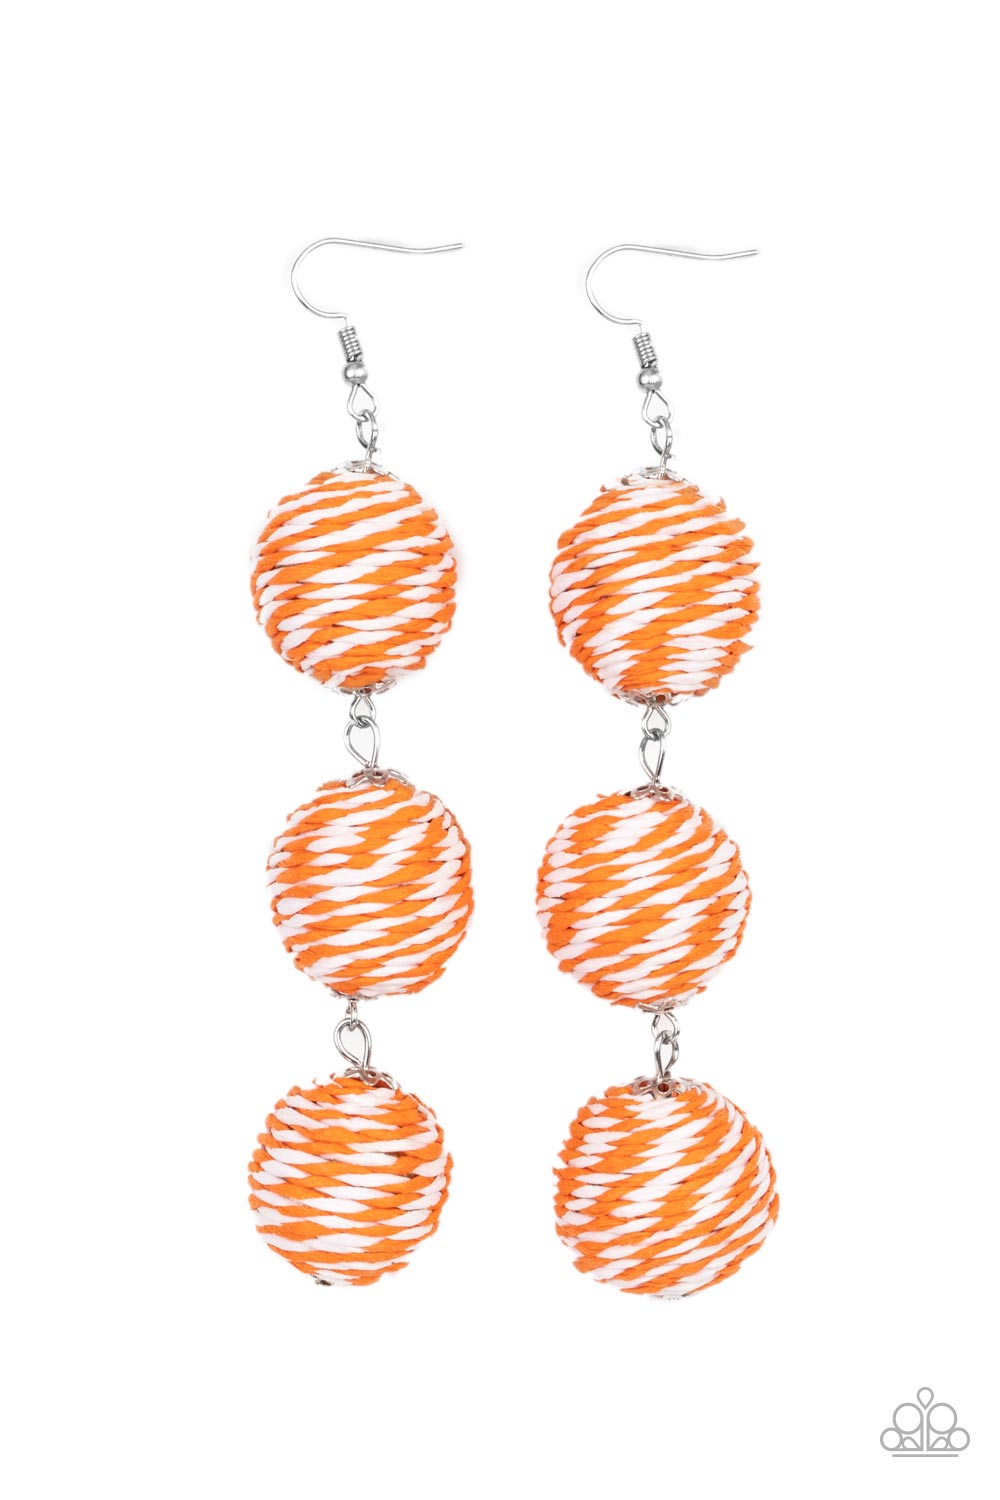 A woven collection of orange and white crepe-like strings ornately wraps around three hanging beads, reminiscent of decorative party lanterns. Earring attaches to a standard fishhook fitting.